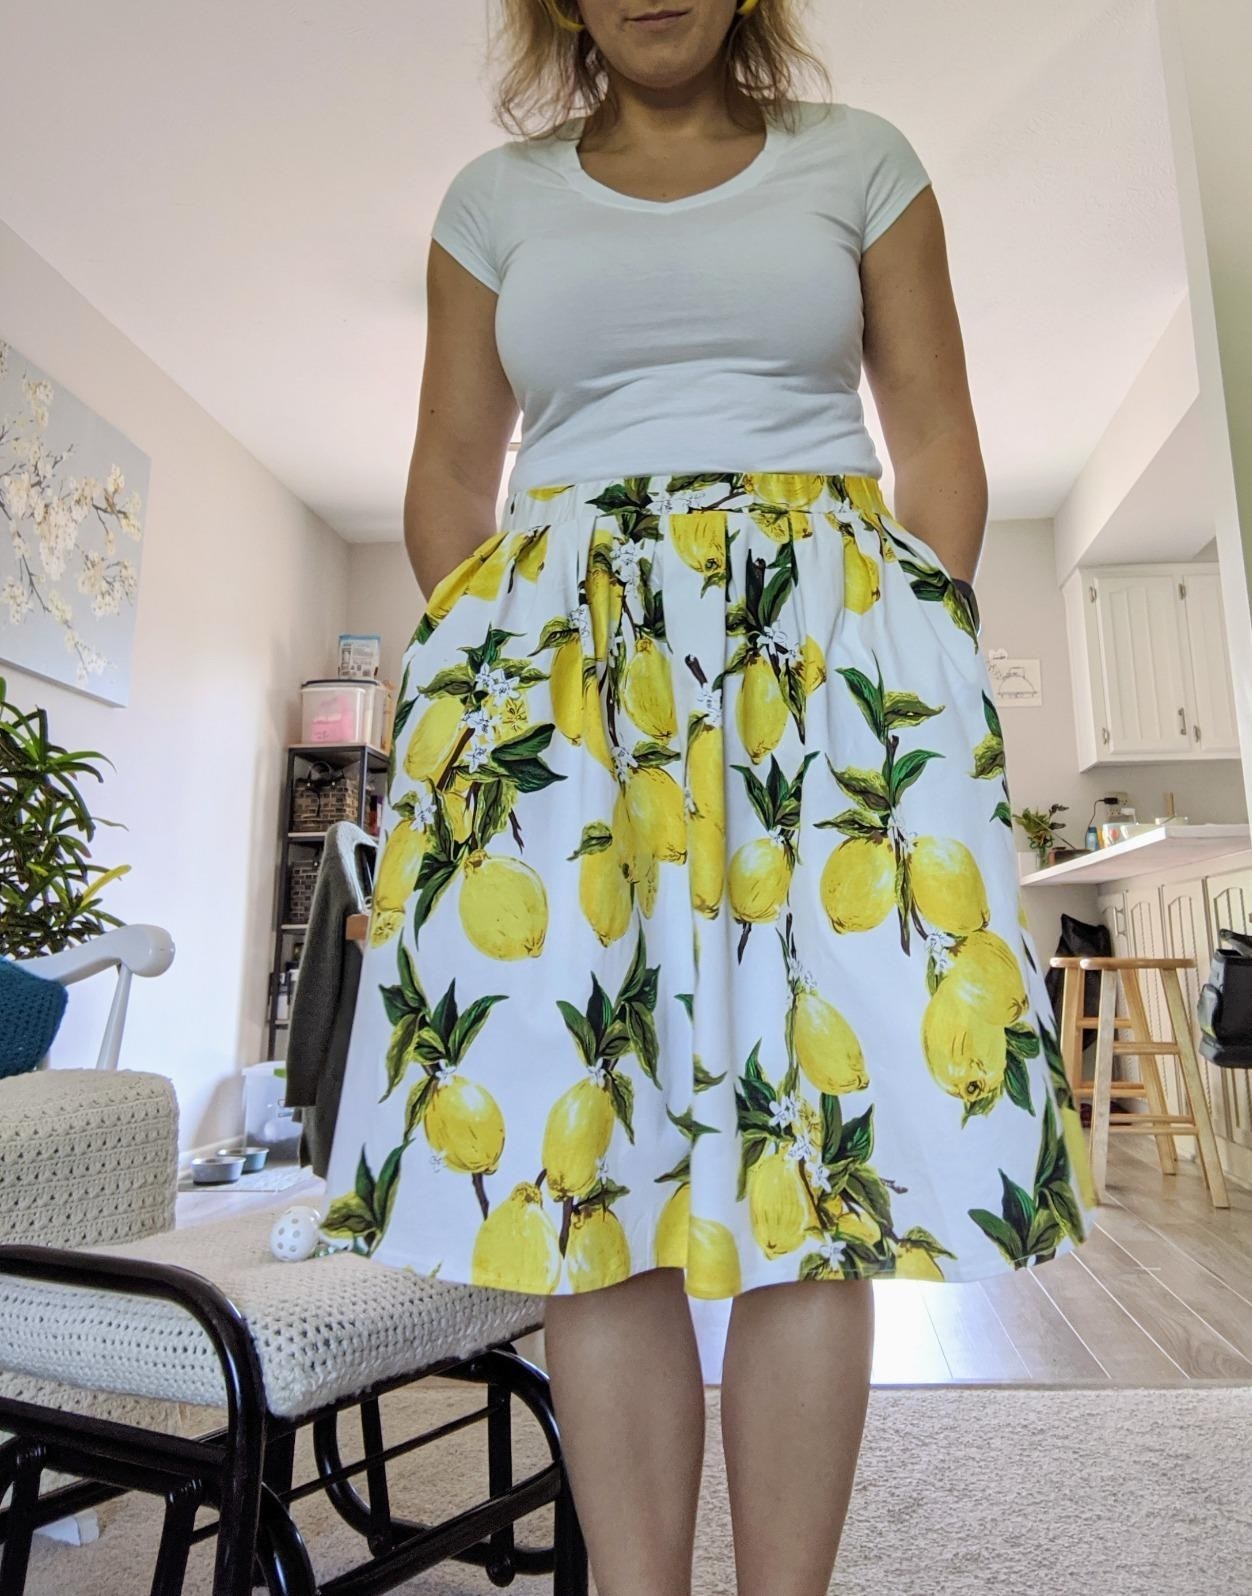 The dress with lemon print worn by an Amazon reviewer